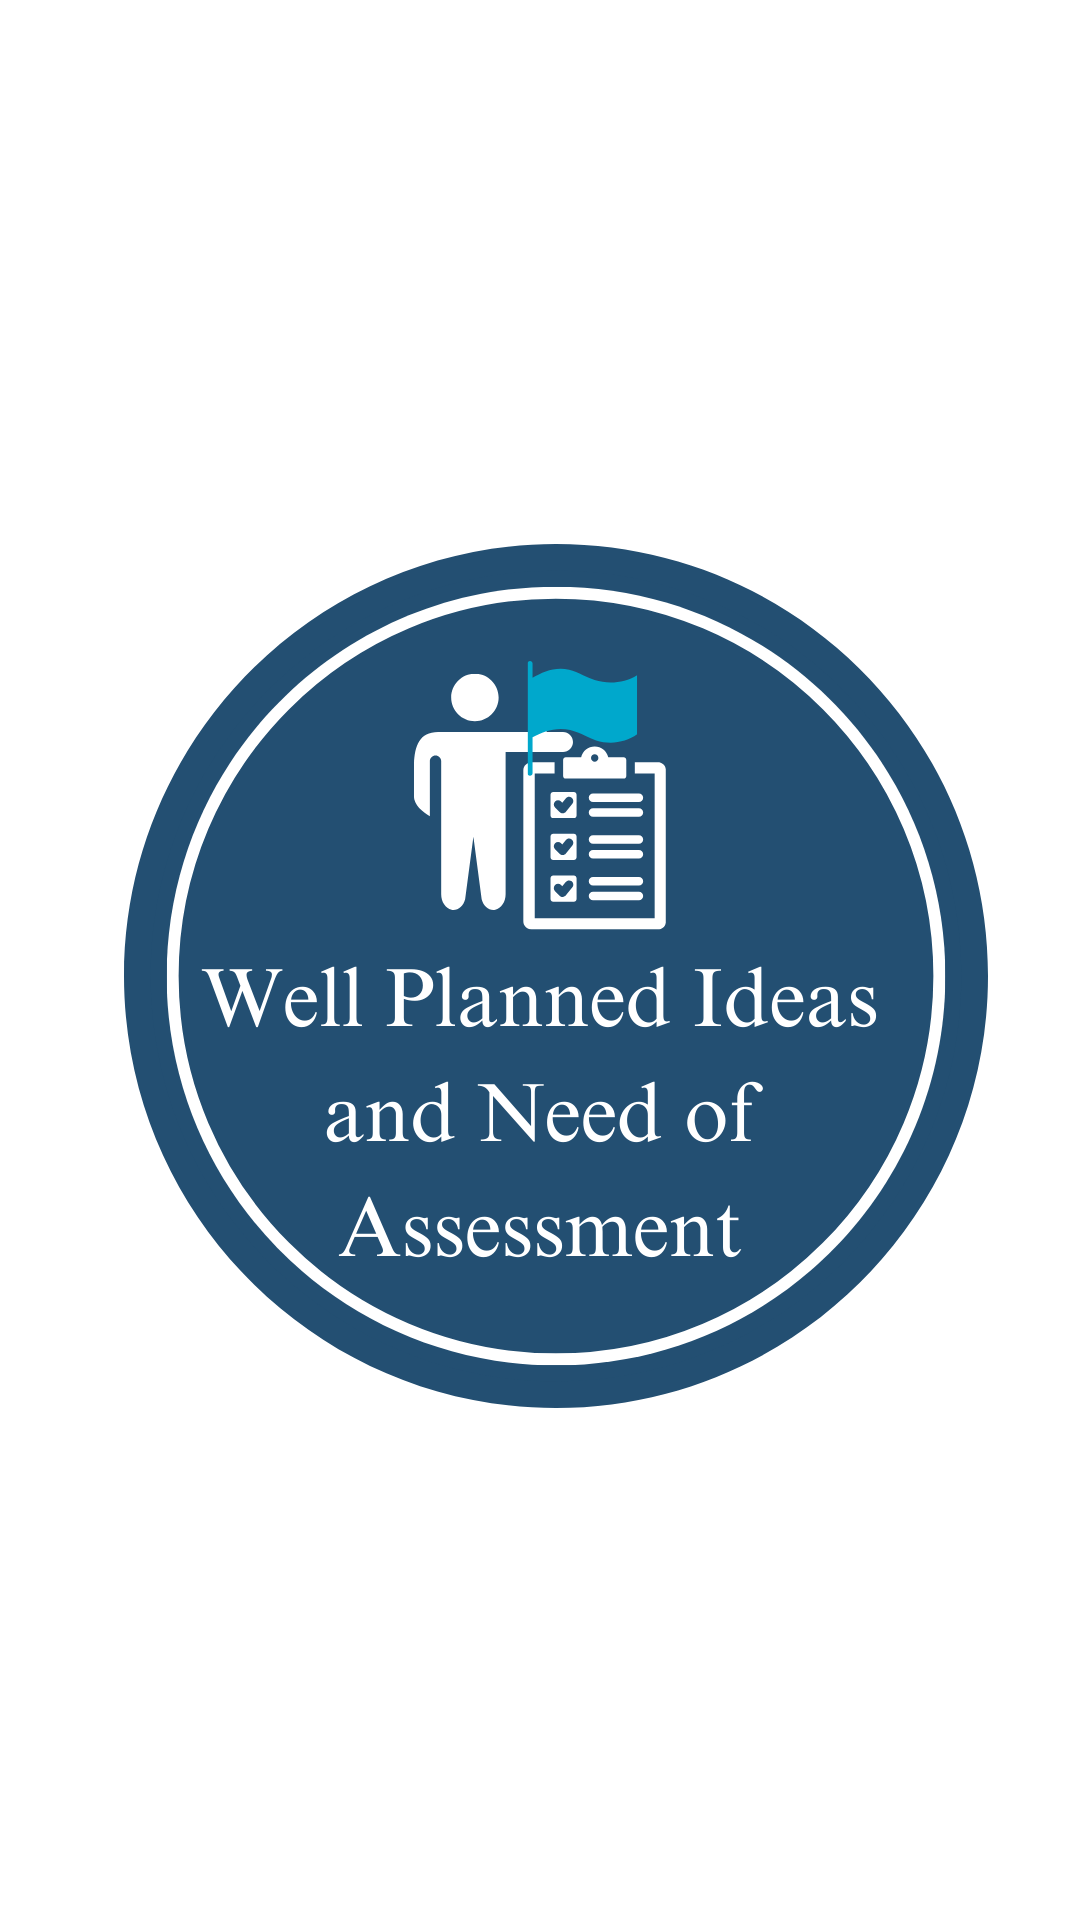 Well Planned Ideas and Need of Assessment